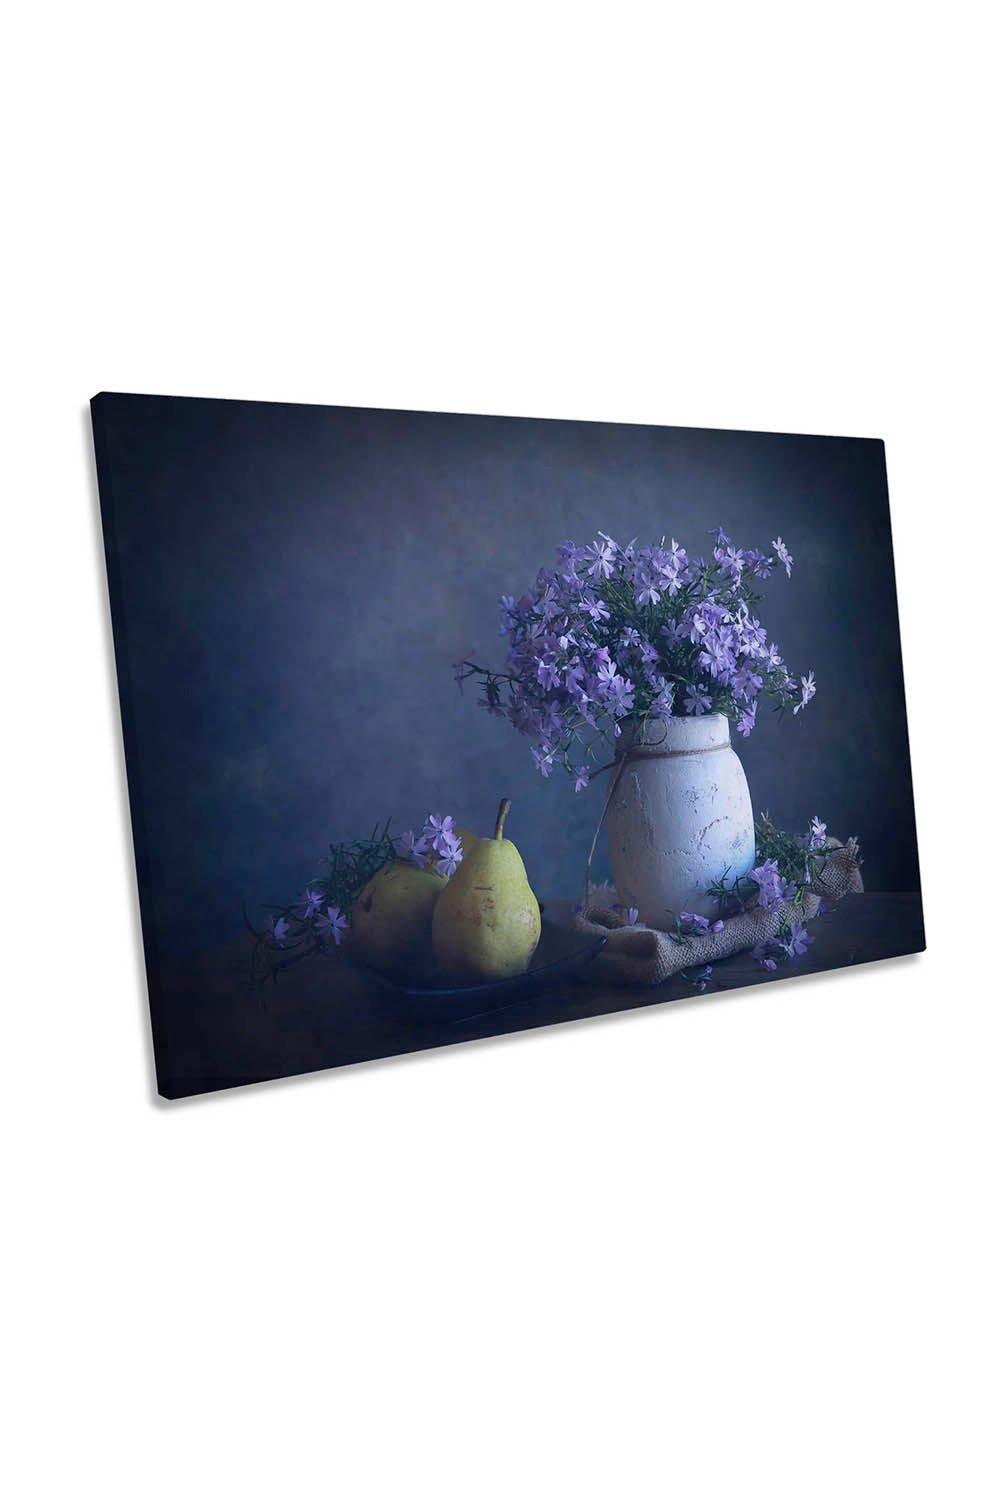 Purple Flowers Still Life Fruits Canvas Wall Art Picture Print